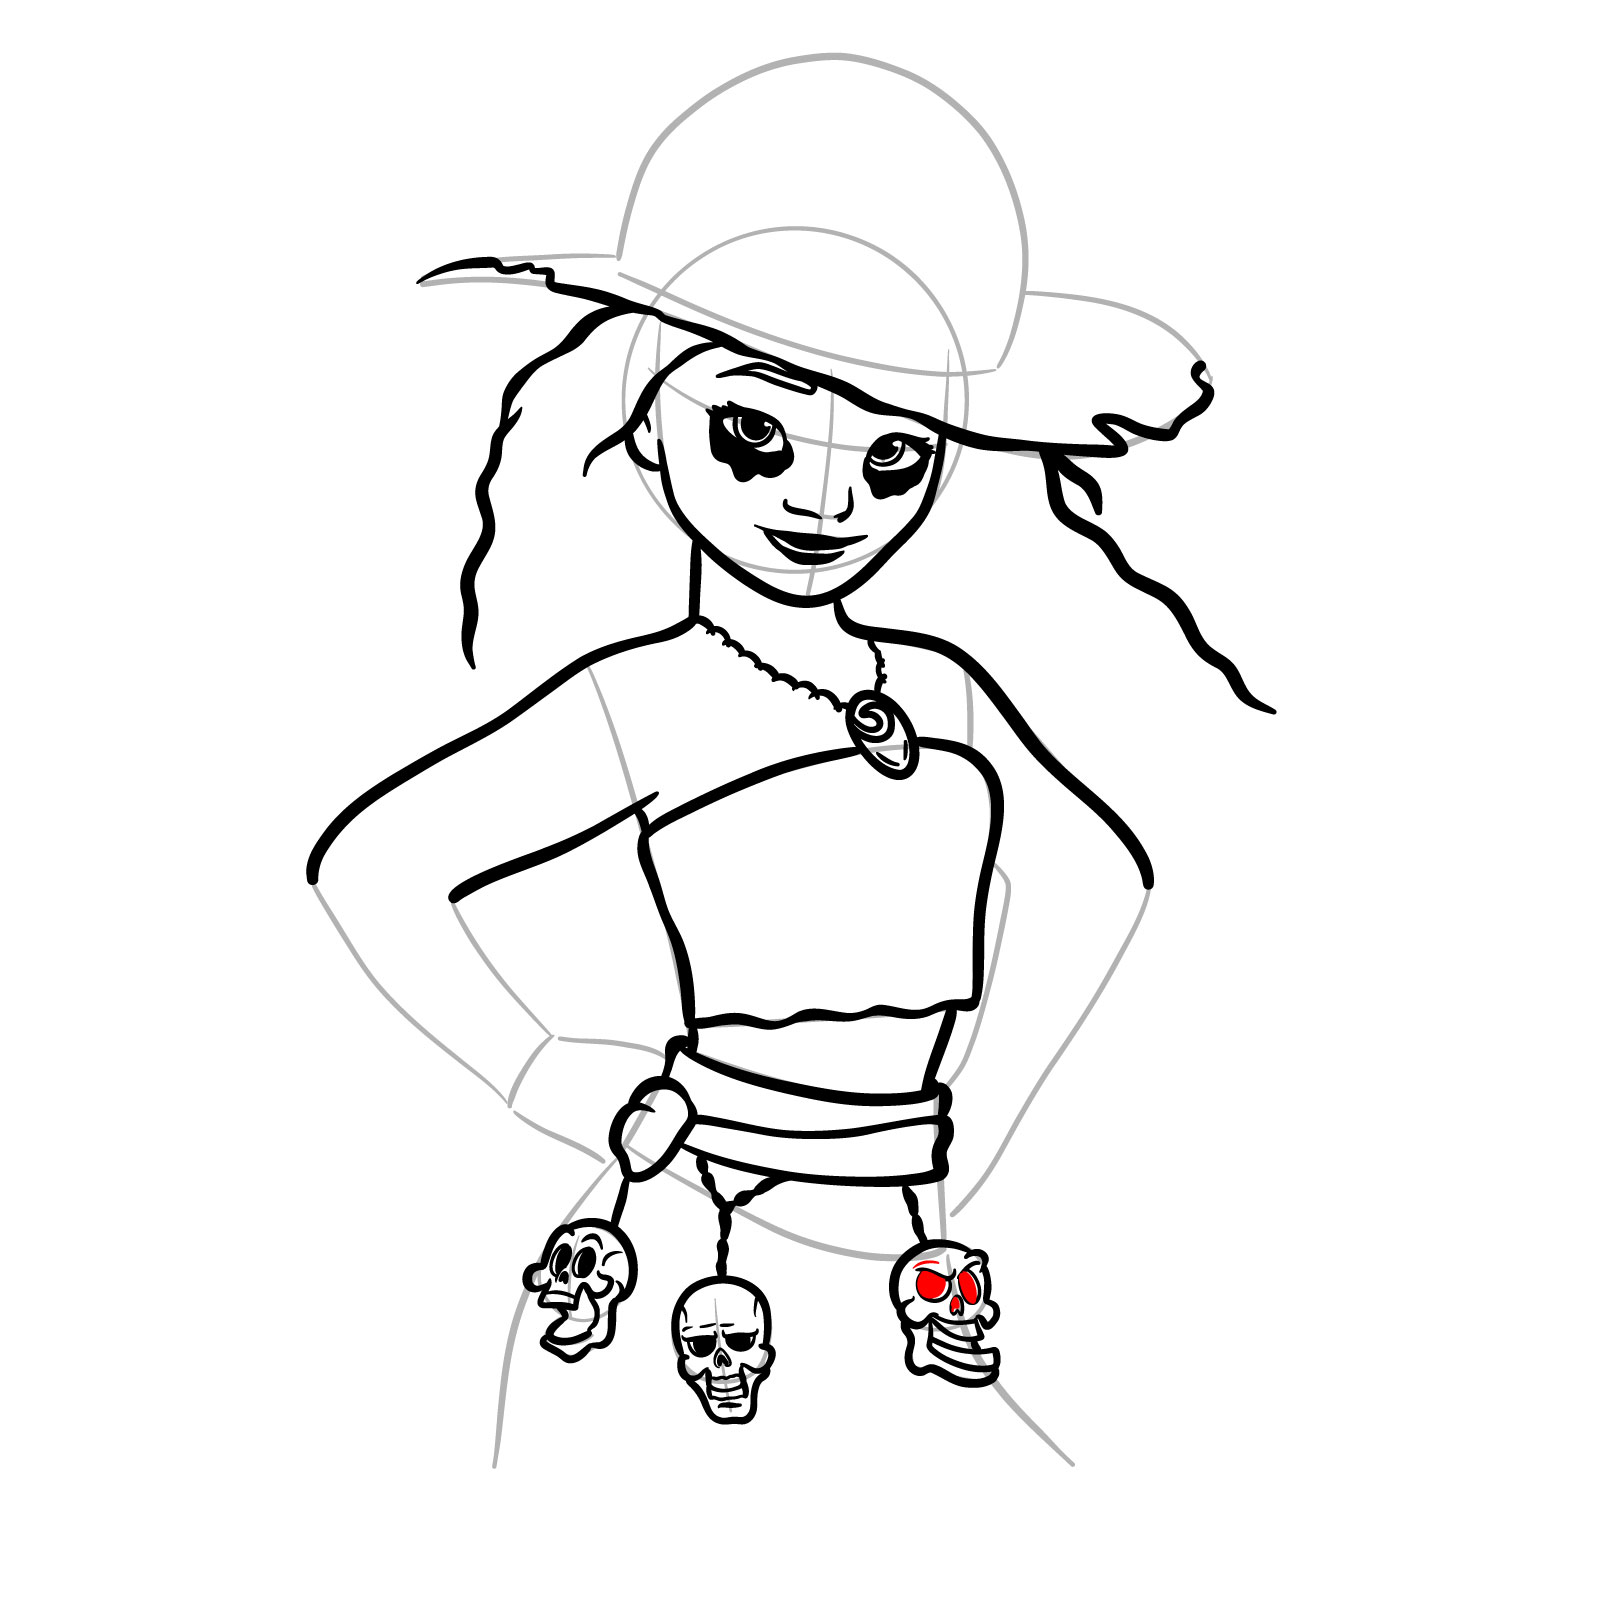 How to Draw Halloween Moana as a Staw Hat Pirate - step 27